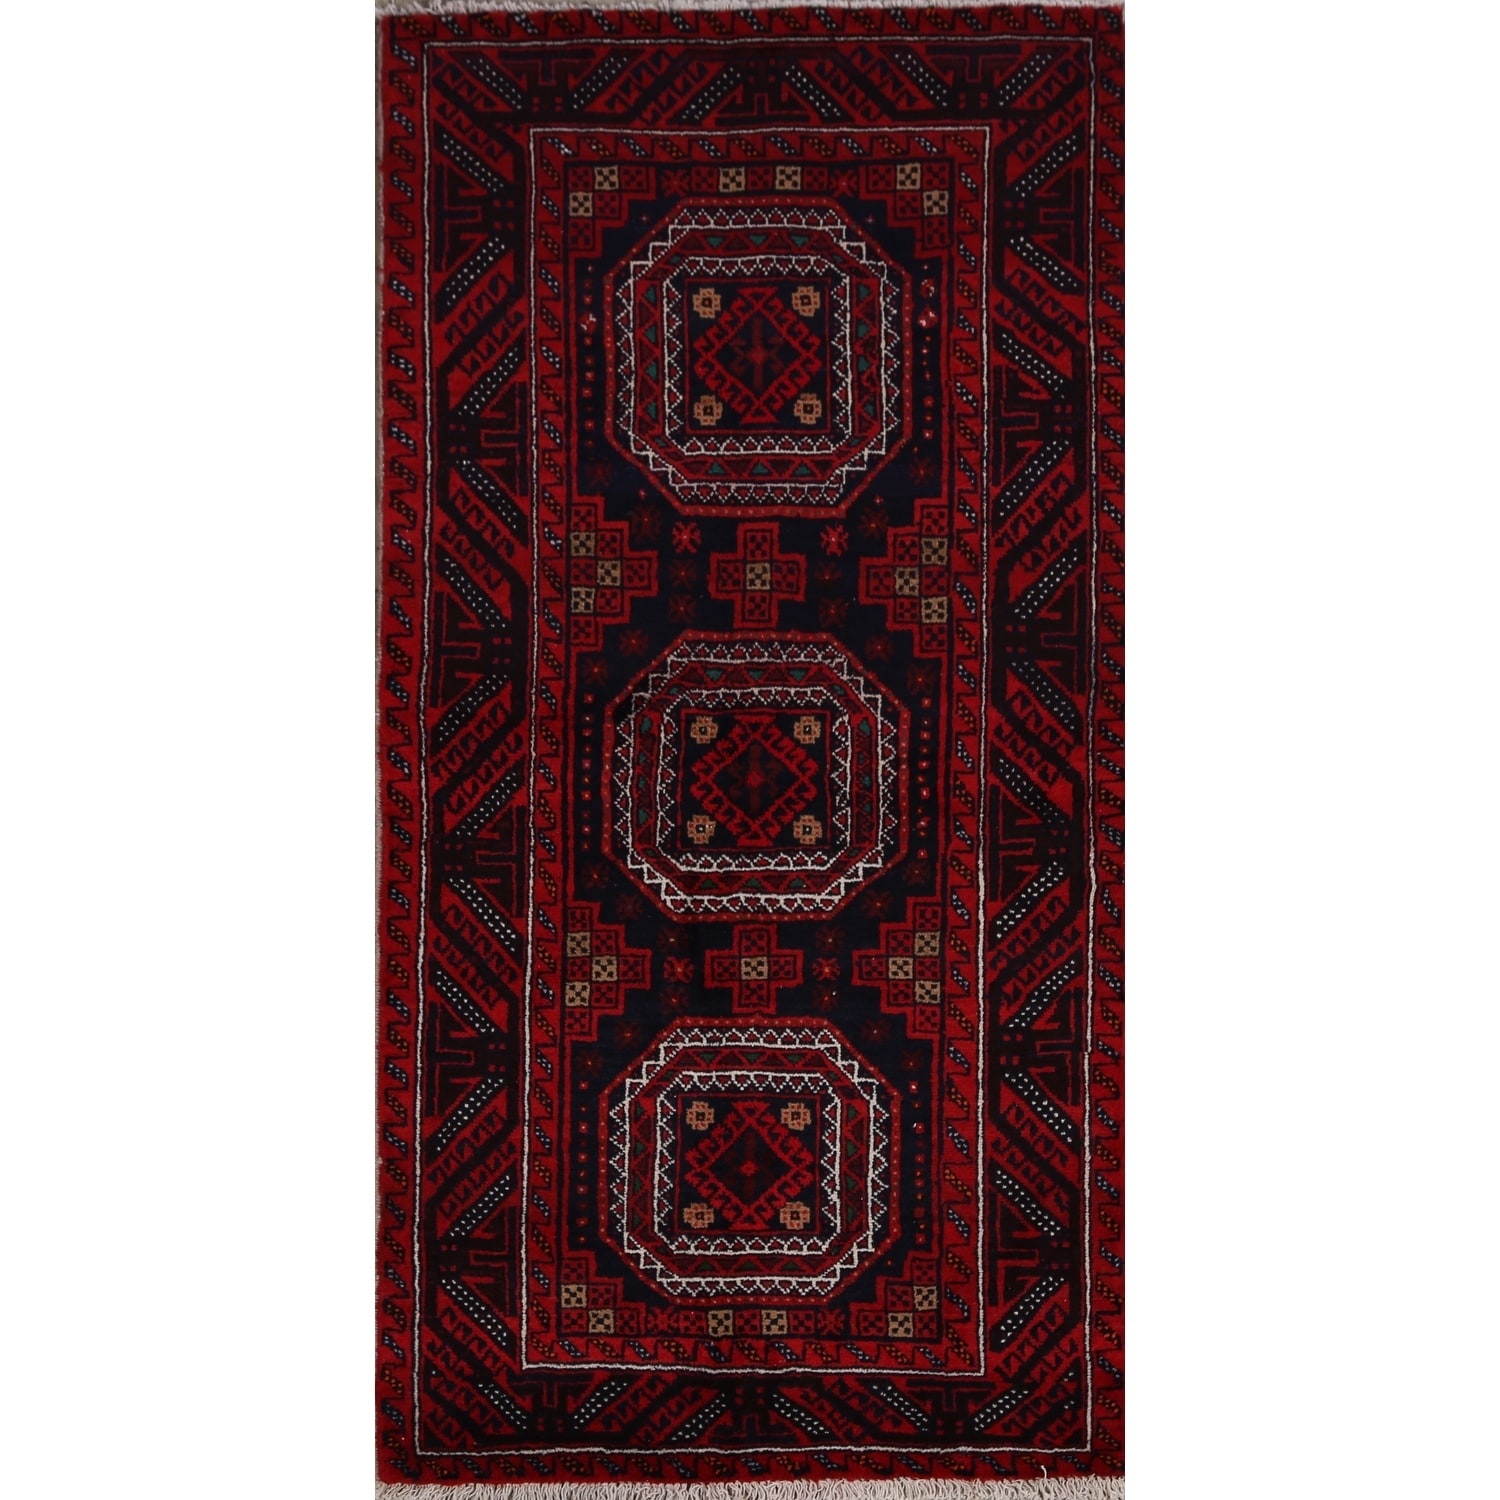 Tribal Geometric Balouch Oriental Area Rug Hand-Knotted Foyer Carpet - 3'4